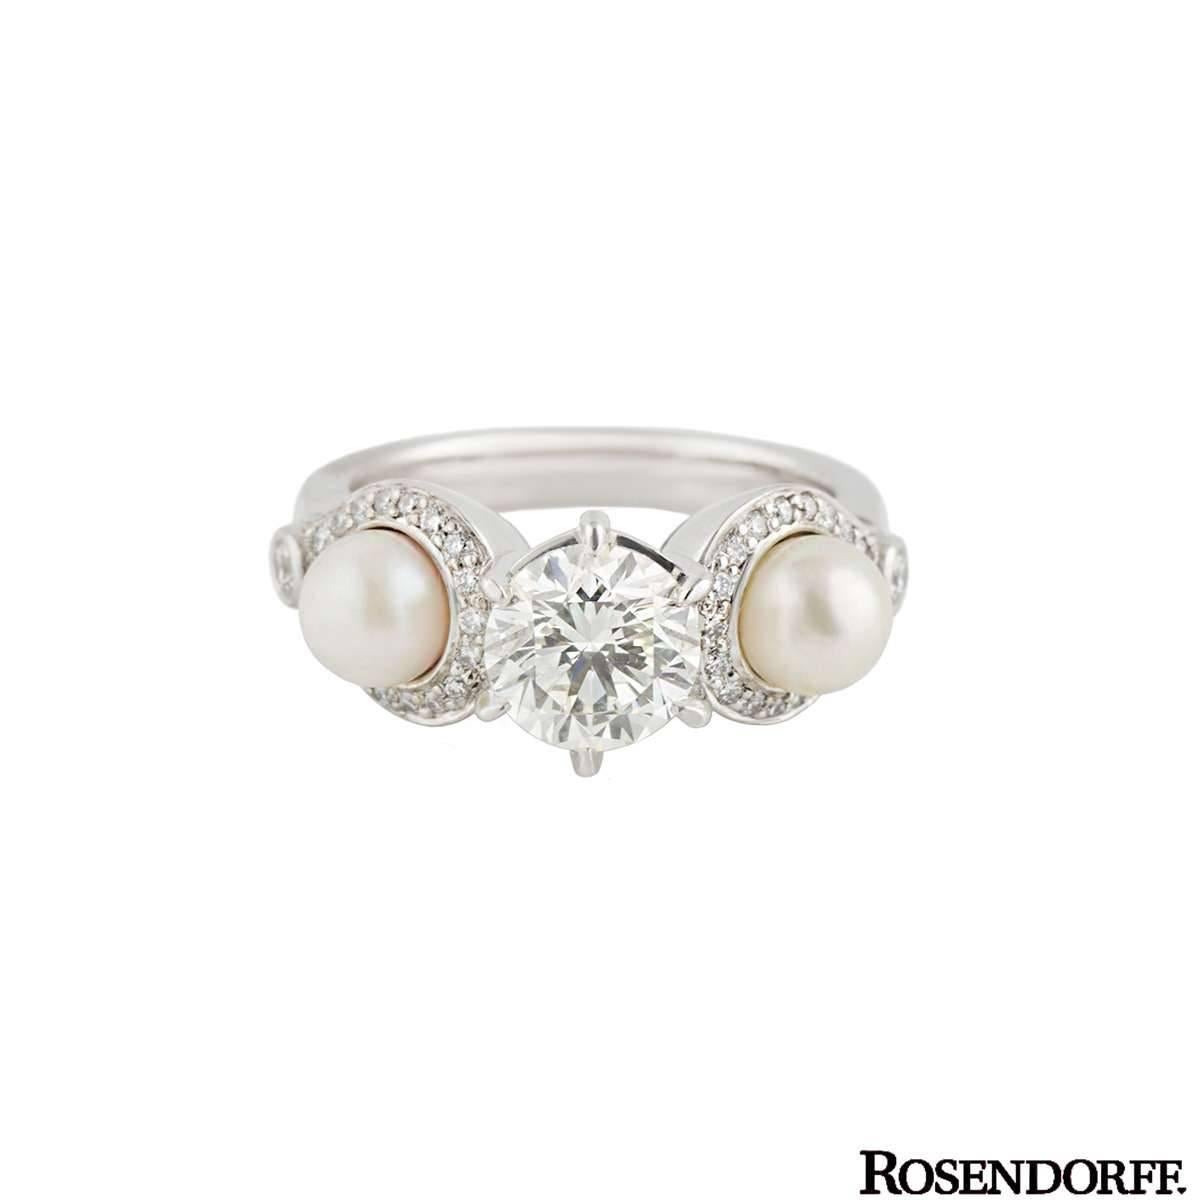 US size 4 5/8.  A beautiful 18k white gold diamond and pearl dress ring by Rosendorff. The ring is set to the centre with a 1.20ct round brilliant cut diamond, J colour and SI1 in clarity. The diamond is set in a six claw setting and is complemented